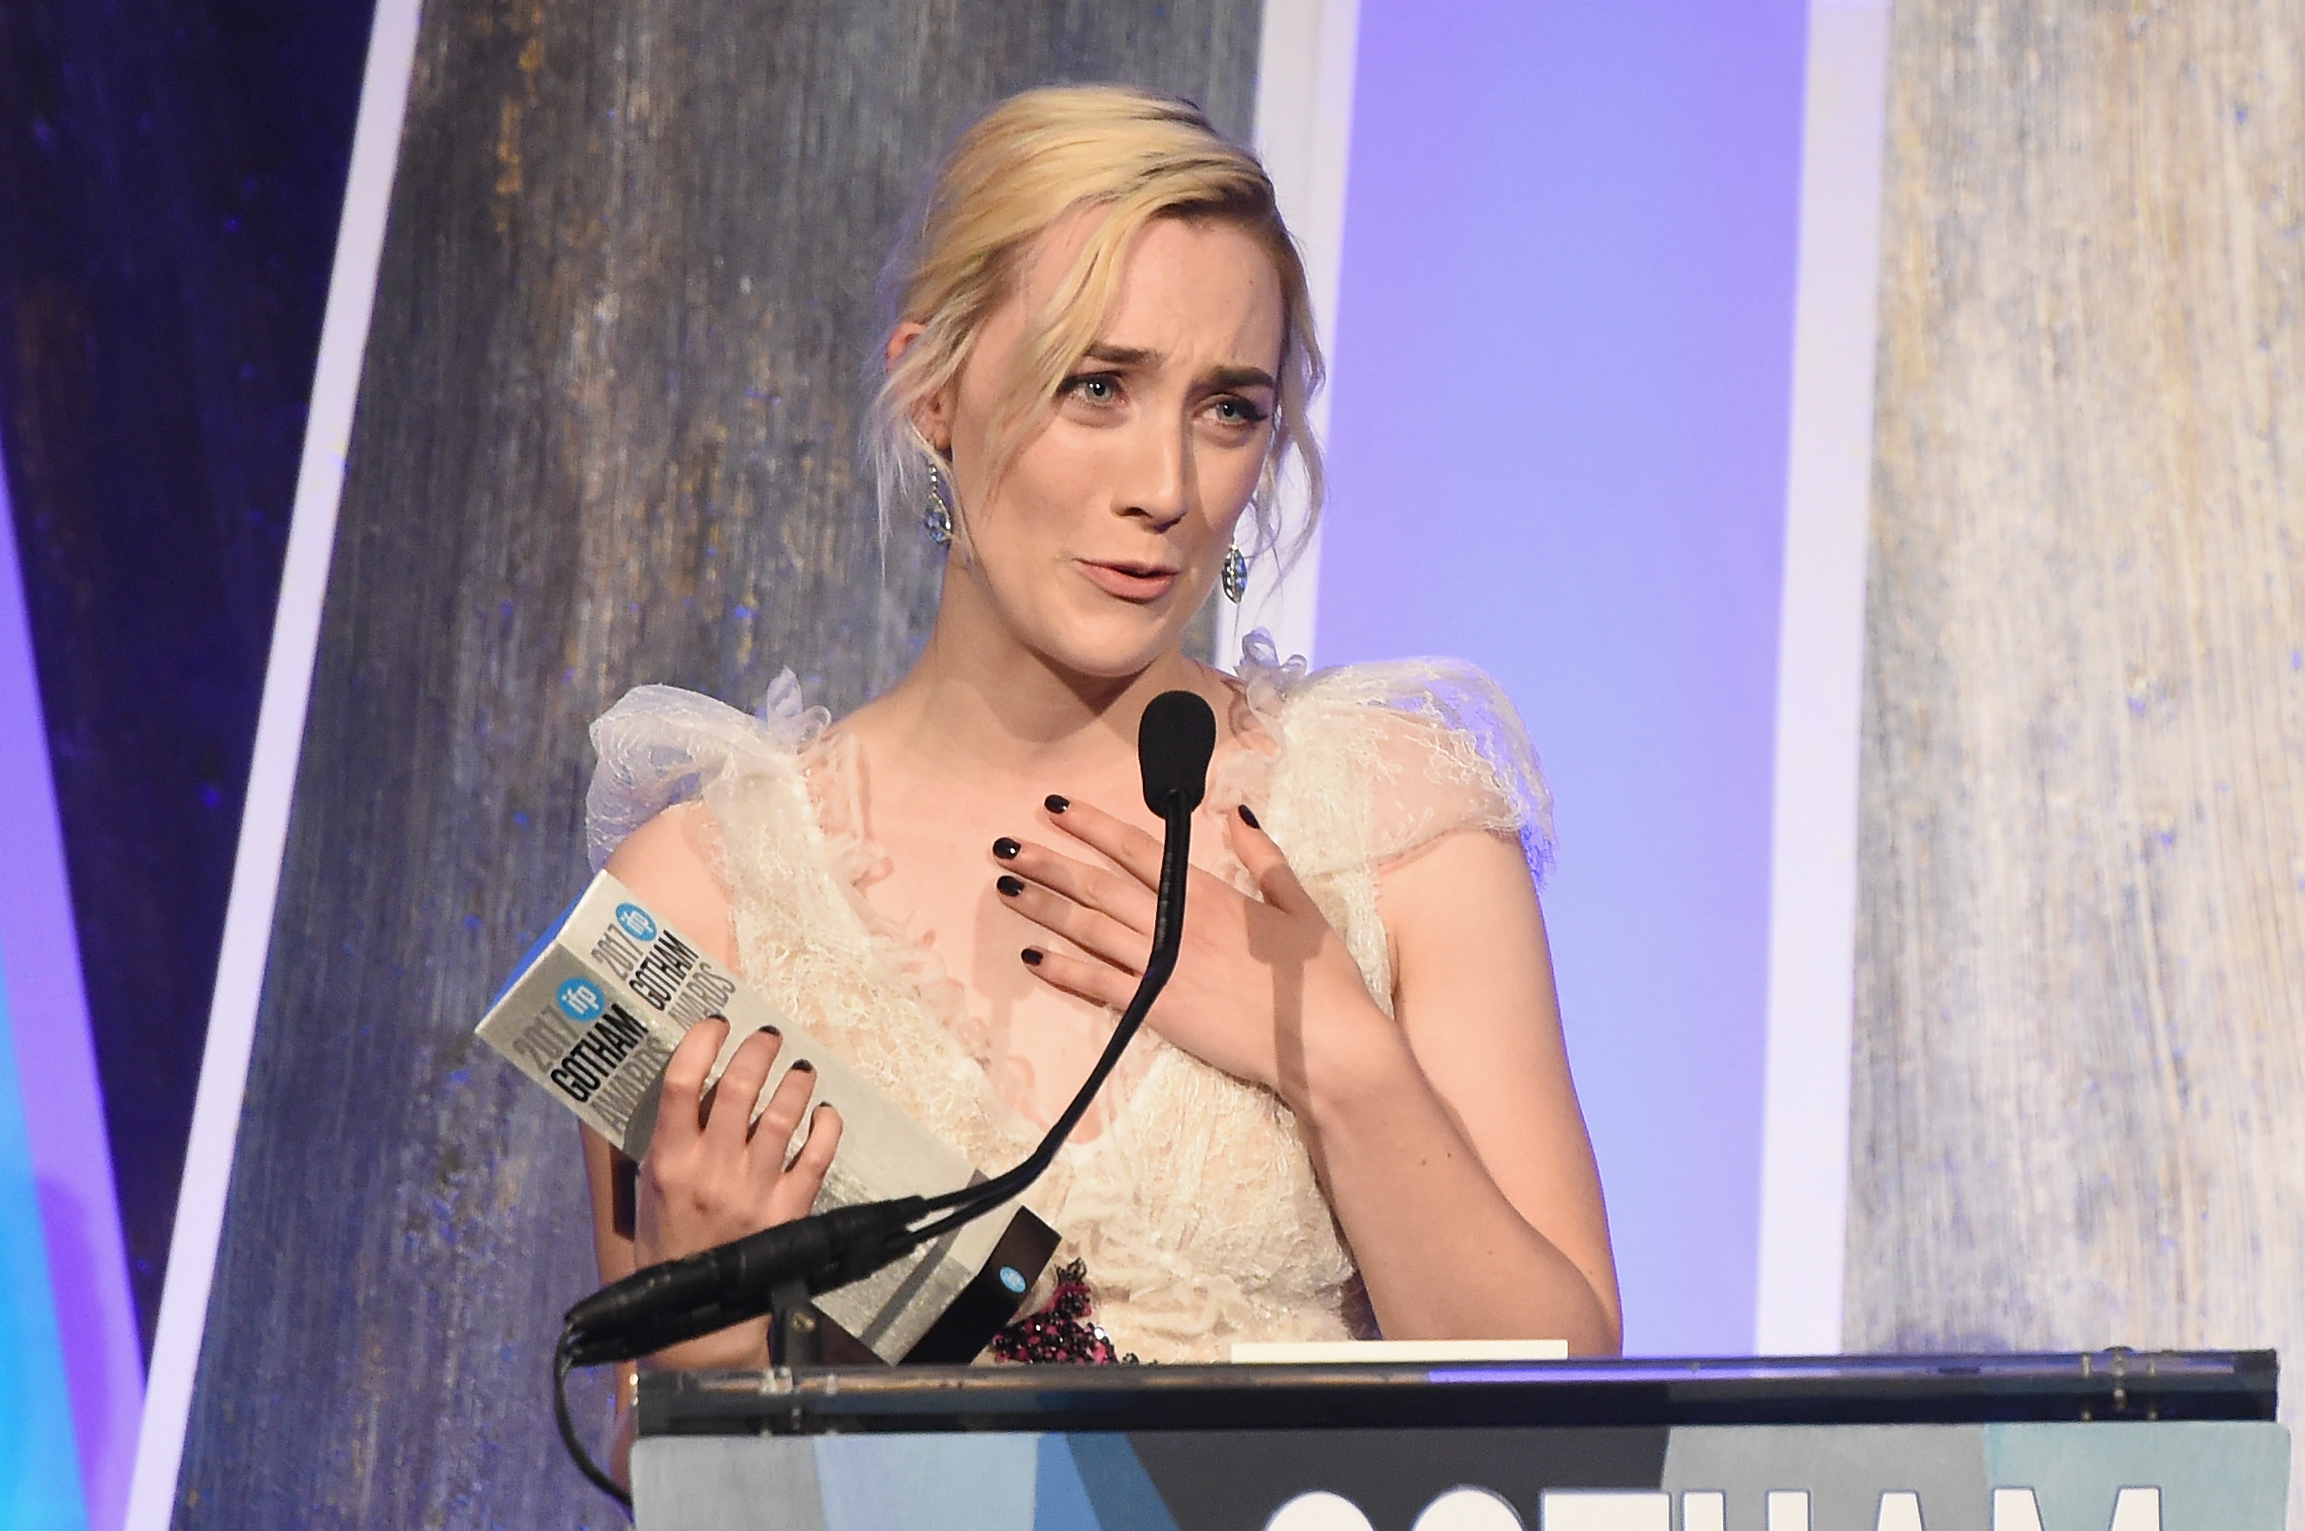 PHOTO: Saoirse Ronan speaks onstage during IFP's 27th Annual Gotham Independent Film Awards, Nov. 27, 2017 in New York City.  